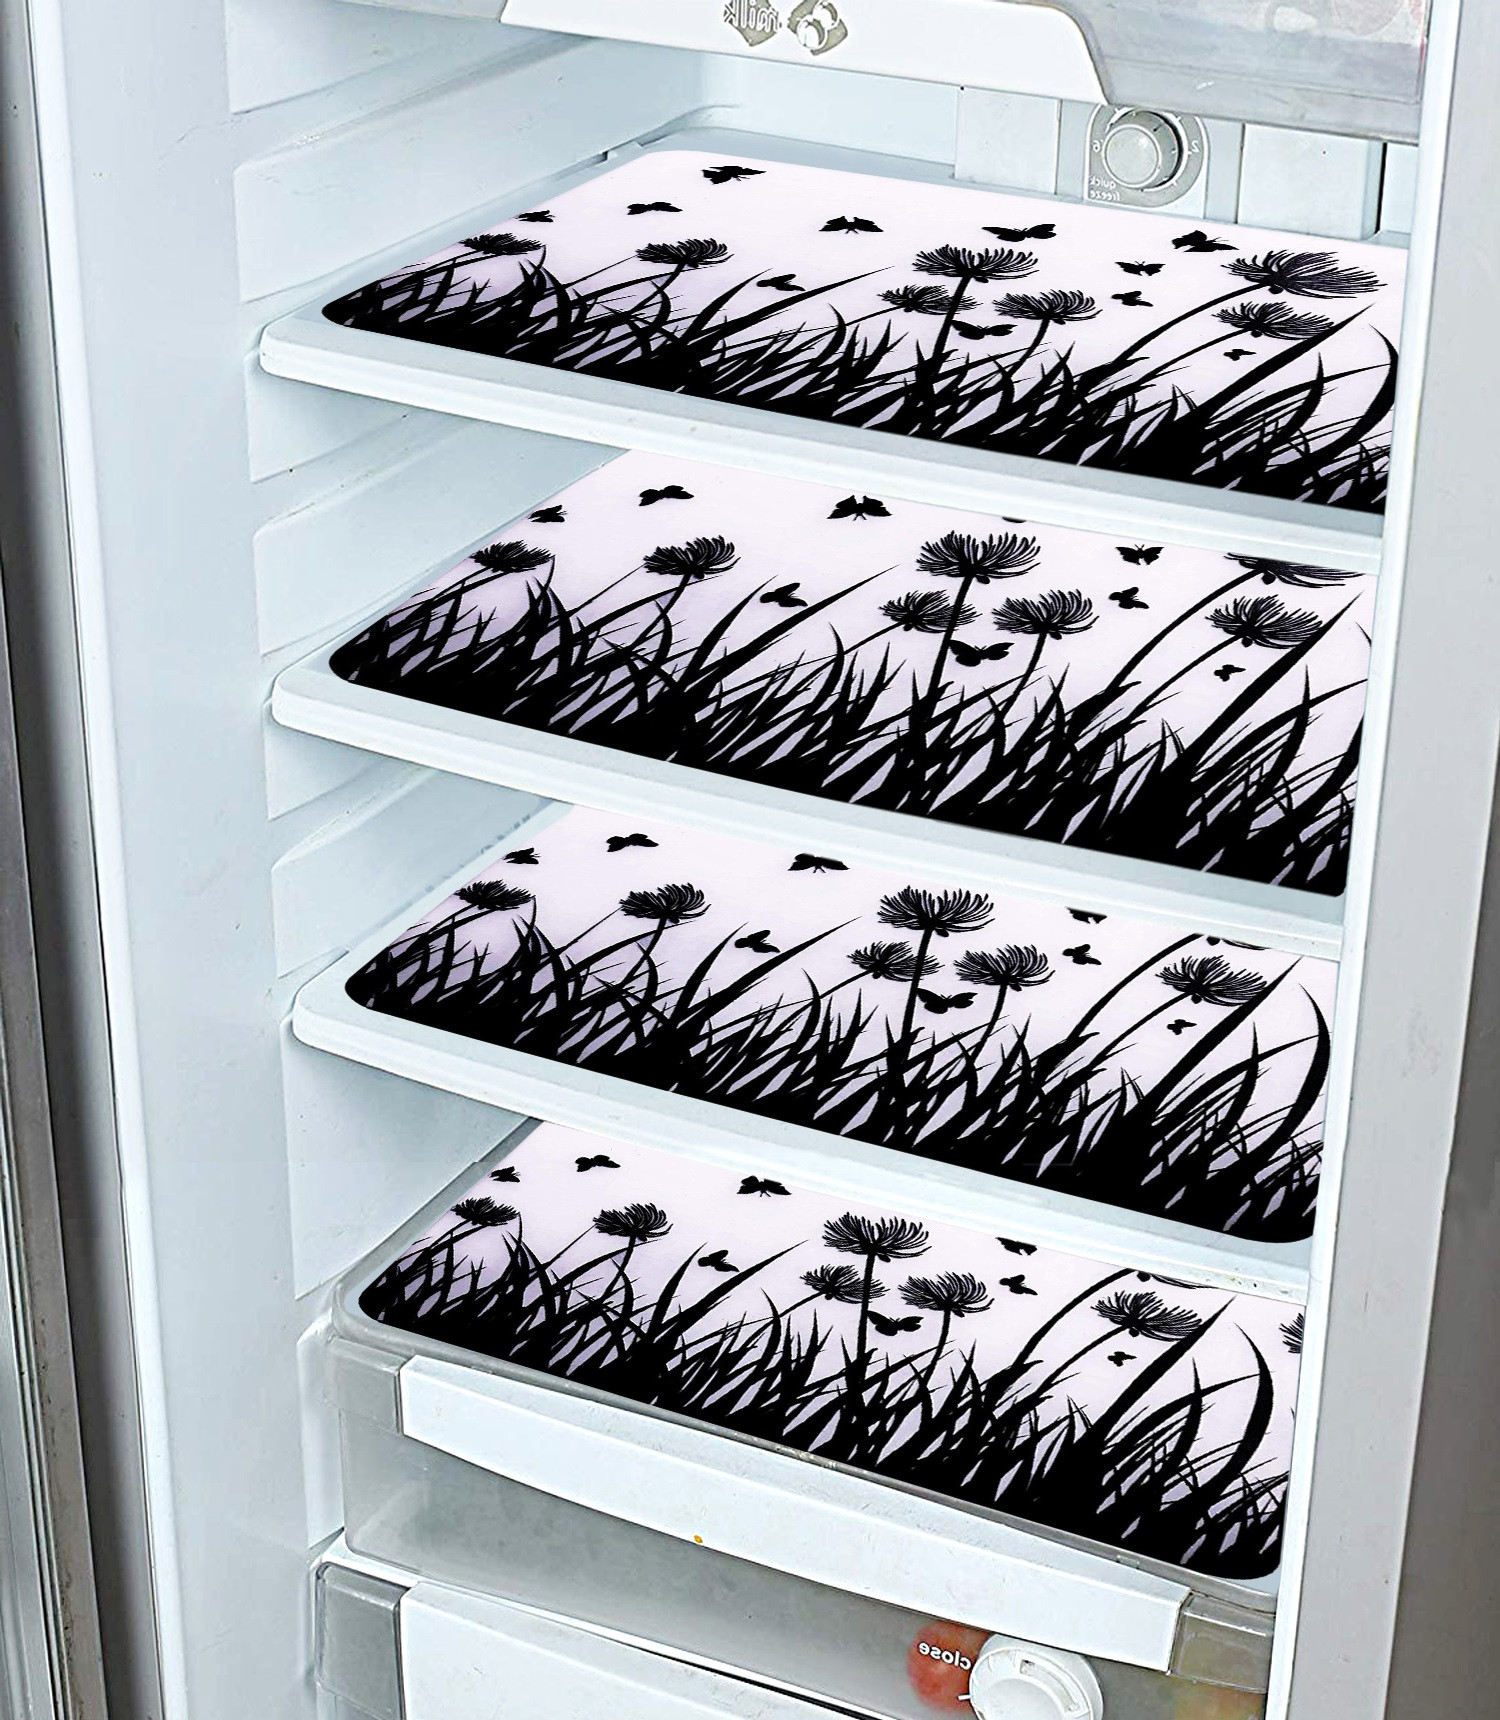 Kuber Industries Butterfly Print Waterproof, Stain Resistant, Washable Refrigerator/Fridge Drawer Mat, Set of 6 (White)